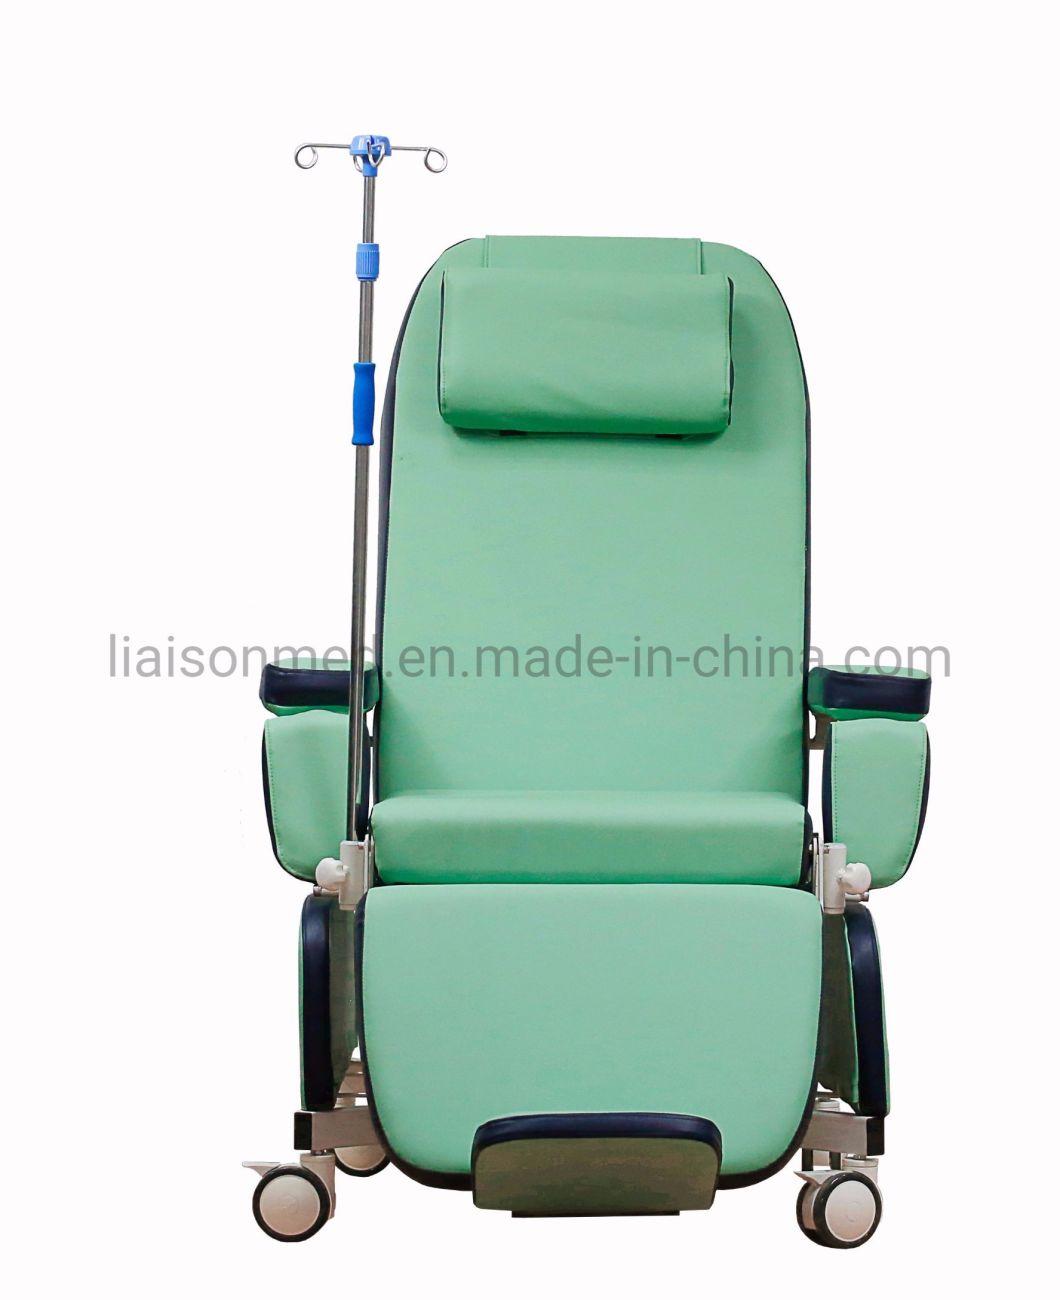 Mn-Bdc002 Medical Furniture Dialysis Adjustable Therapy Transfusion Clinic Infusion Chair